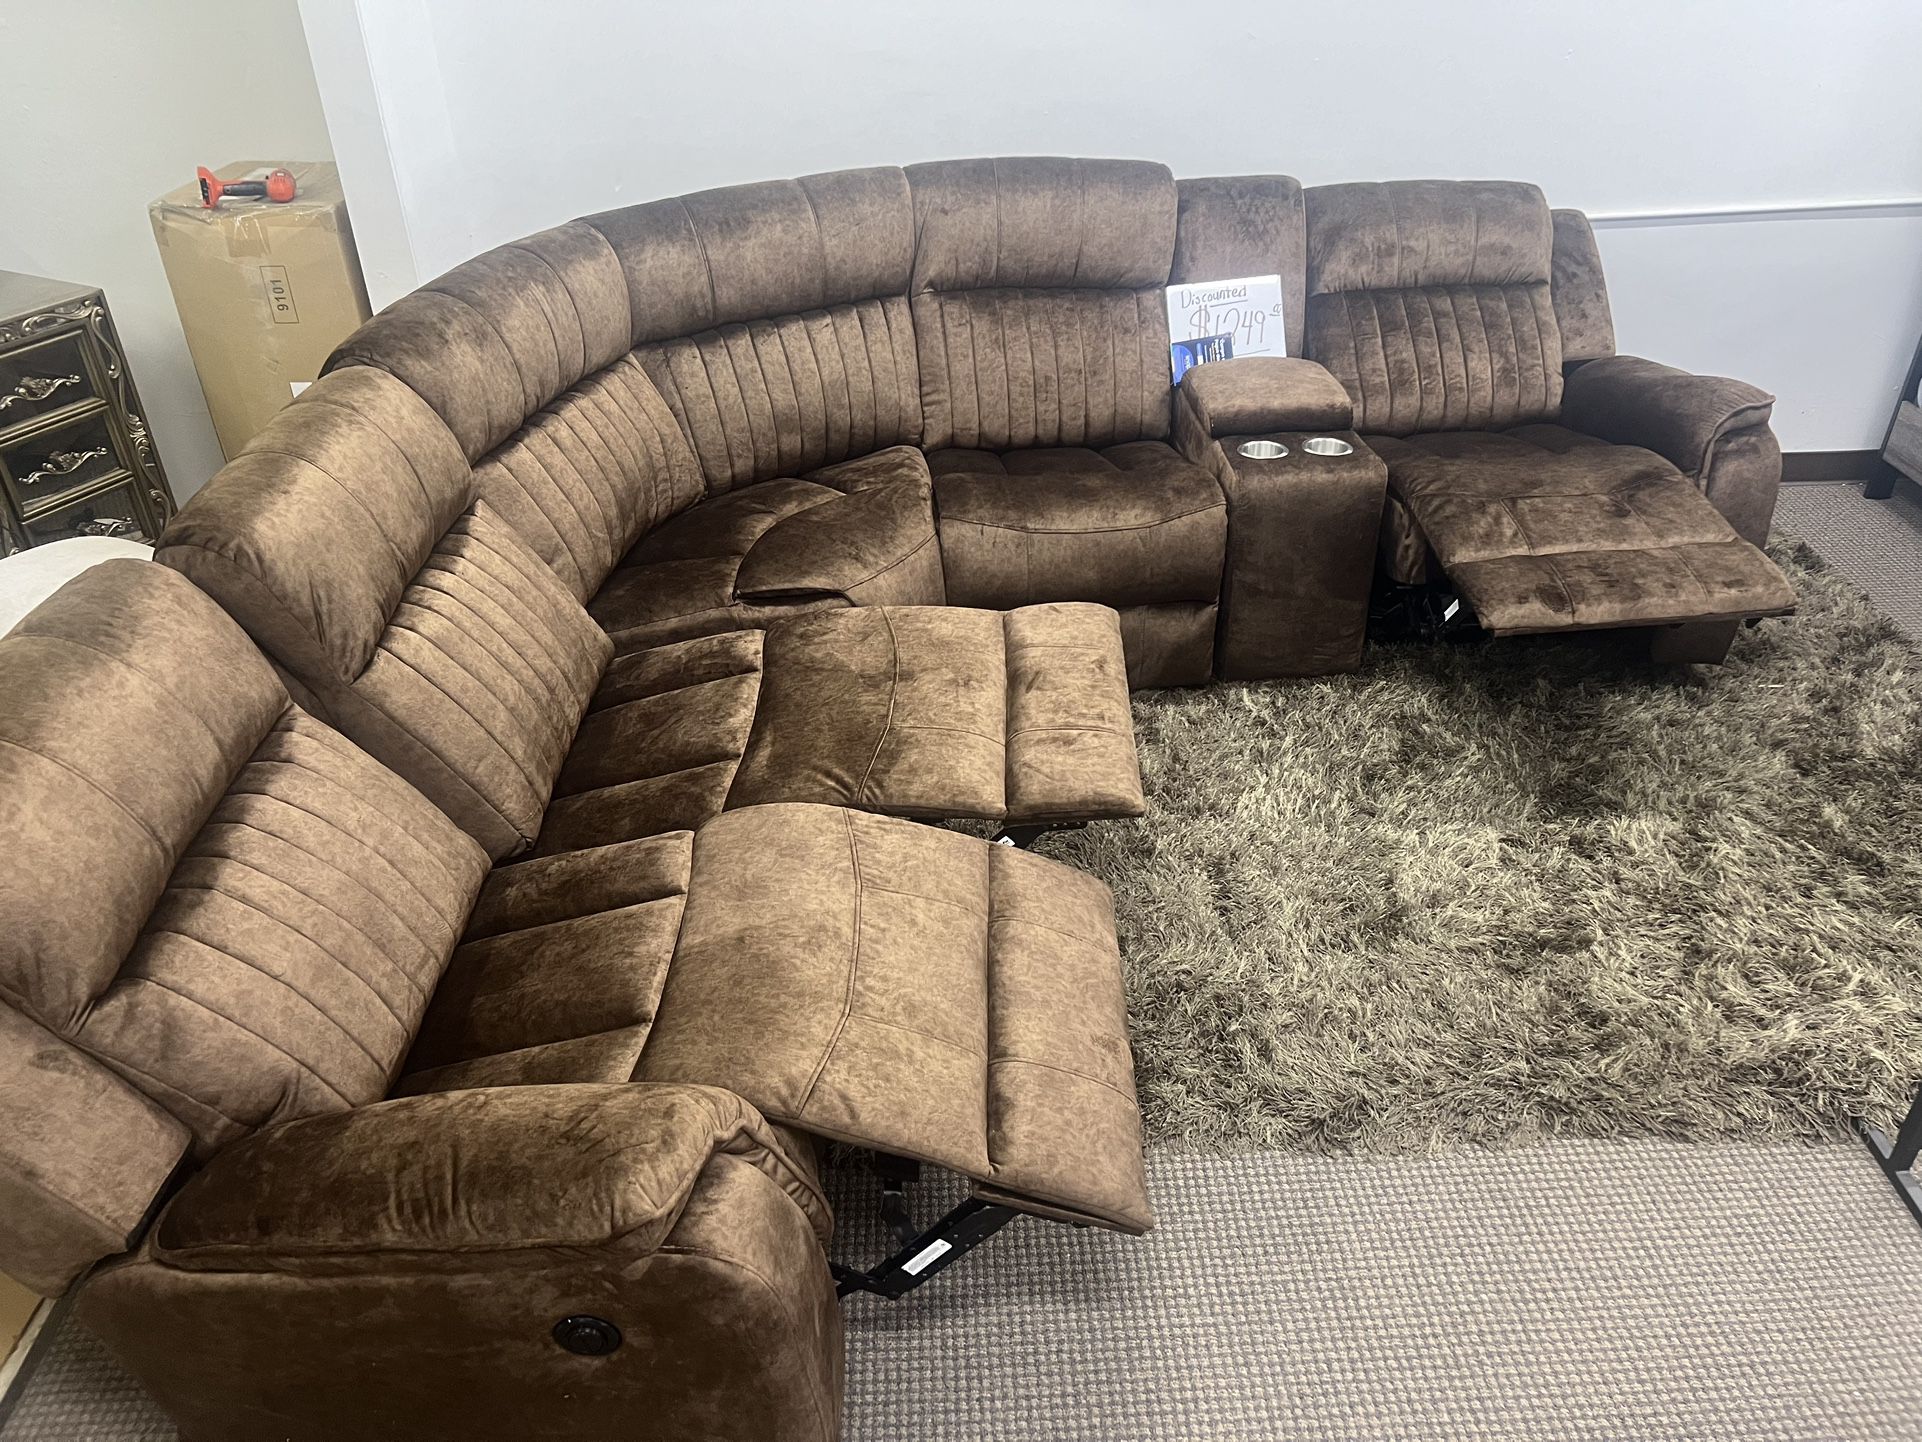 🛋️NEW!! In BOX 📦 Power Recliner BARGAIN 3 Suede Recliner Sectional